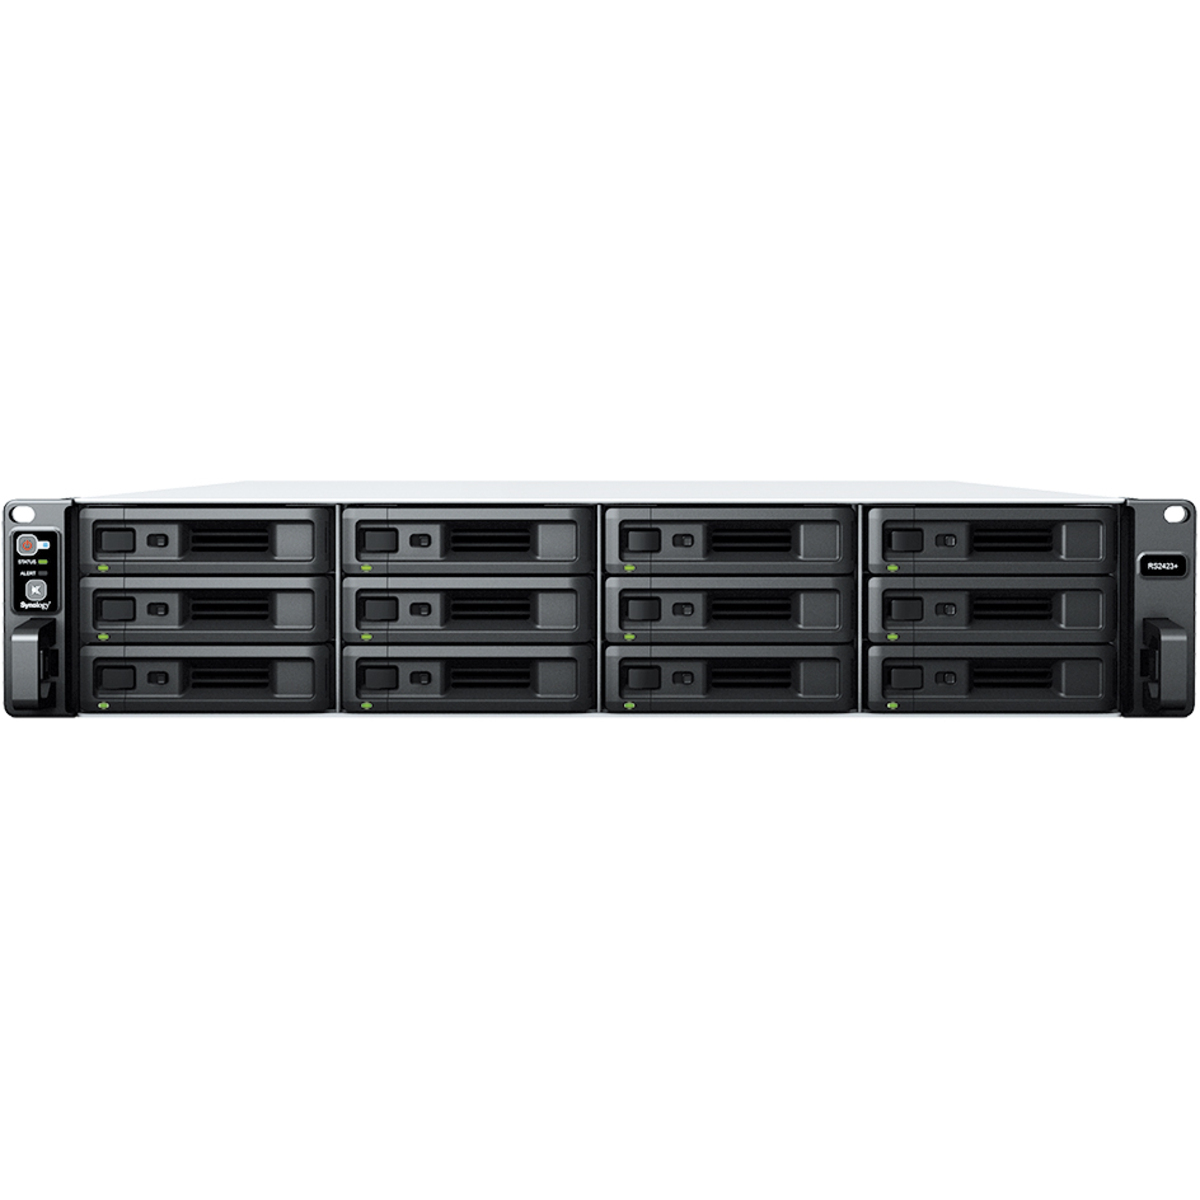 Synology RackStation RS2423+ 10tb 12-Bay RackMount Multimedia / Power User / Business NAS - Network Attached Storage Device 10x1tb Samsung 870 EVO MZ-77E1T0BAM 2.5 560/530MB/s SATA 6Gb/s SSD CONSUMER Class Drives Installed - Burn-In Tested RackStation RS2423+